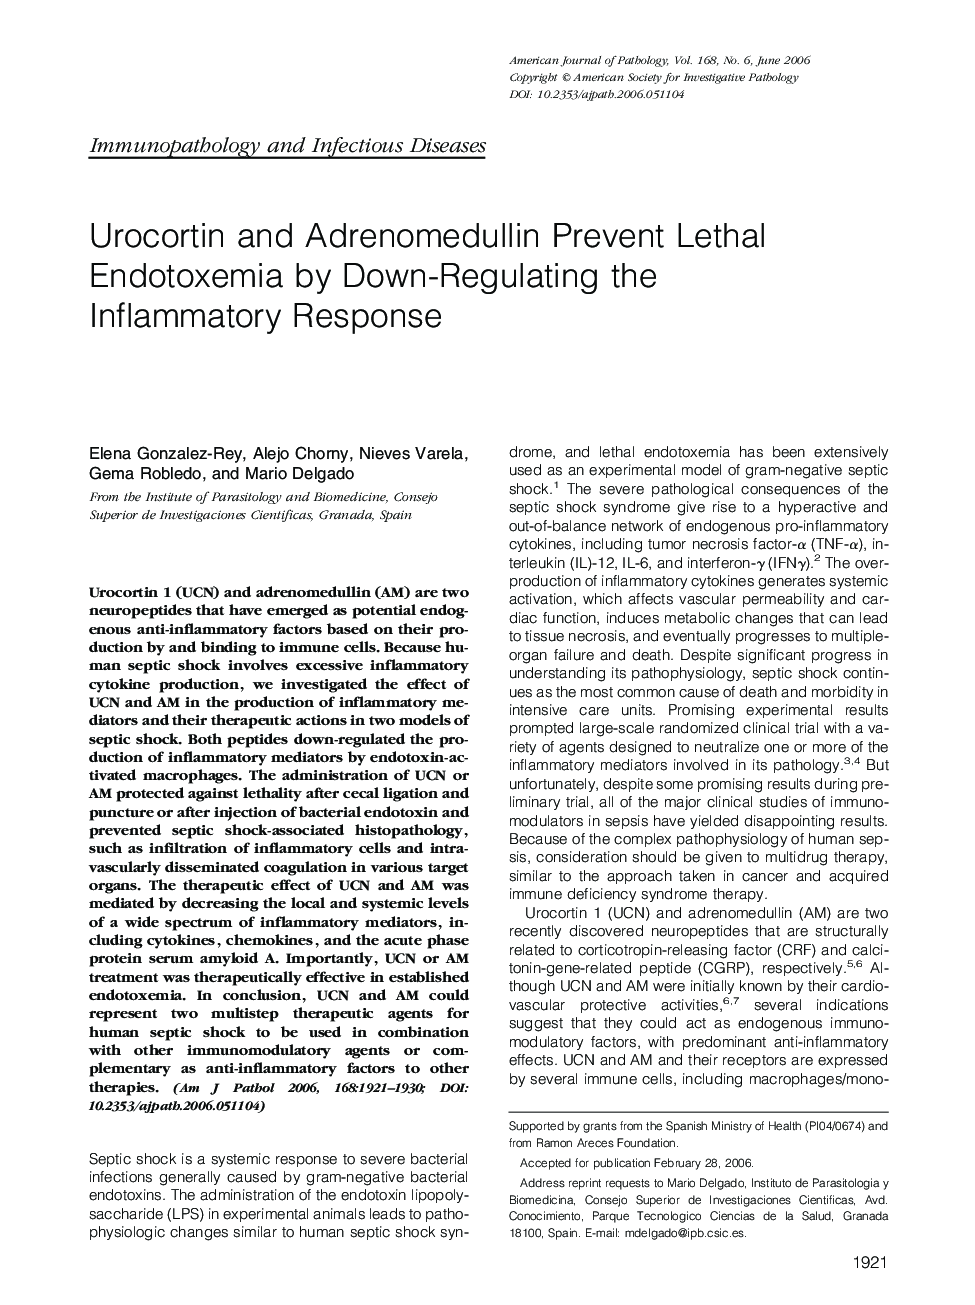 Urocortin and Adrenomedullin Prevent Lethal Endotoxemia by Down-Regulating the Inflammatory Response 